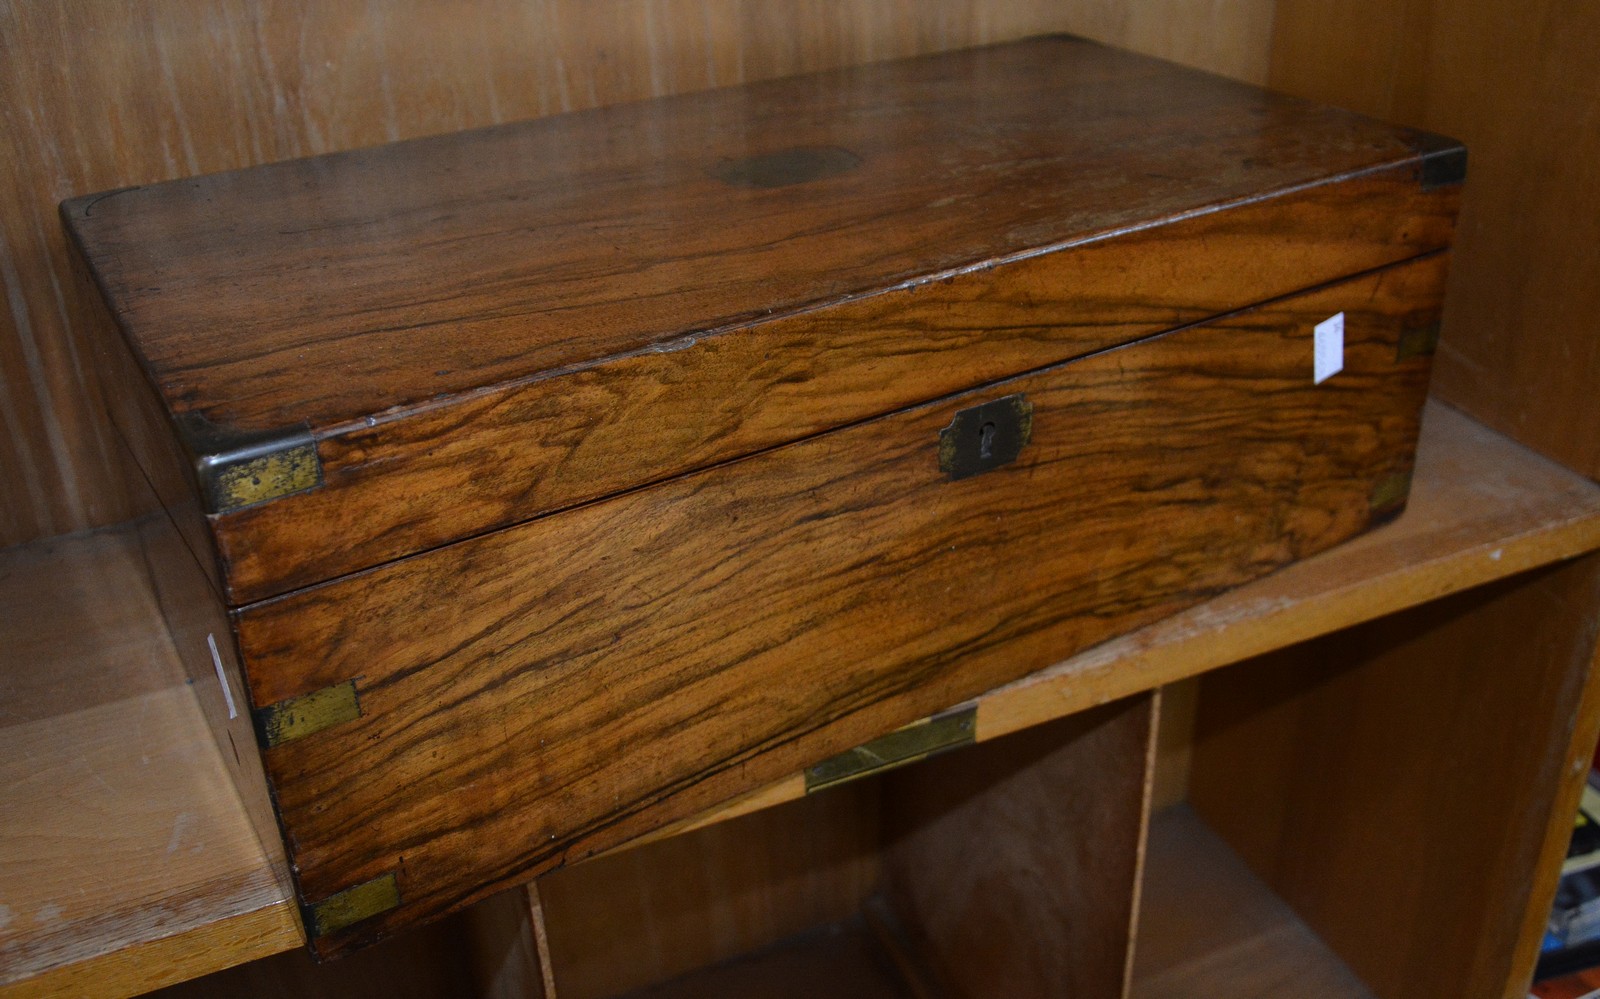 A 19th century walnut writing slope, brass inlay and escutcheon, hinged lid, 50cm wide